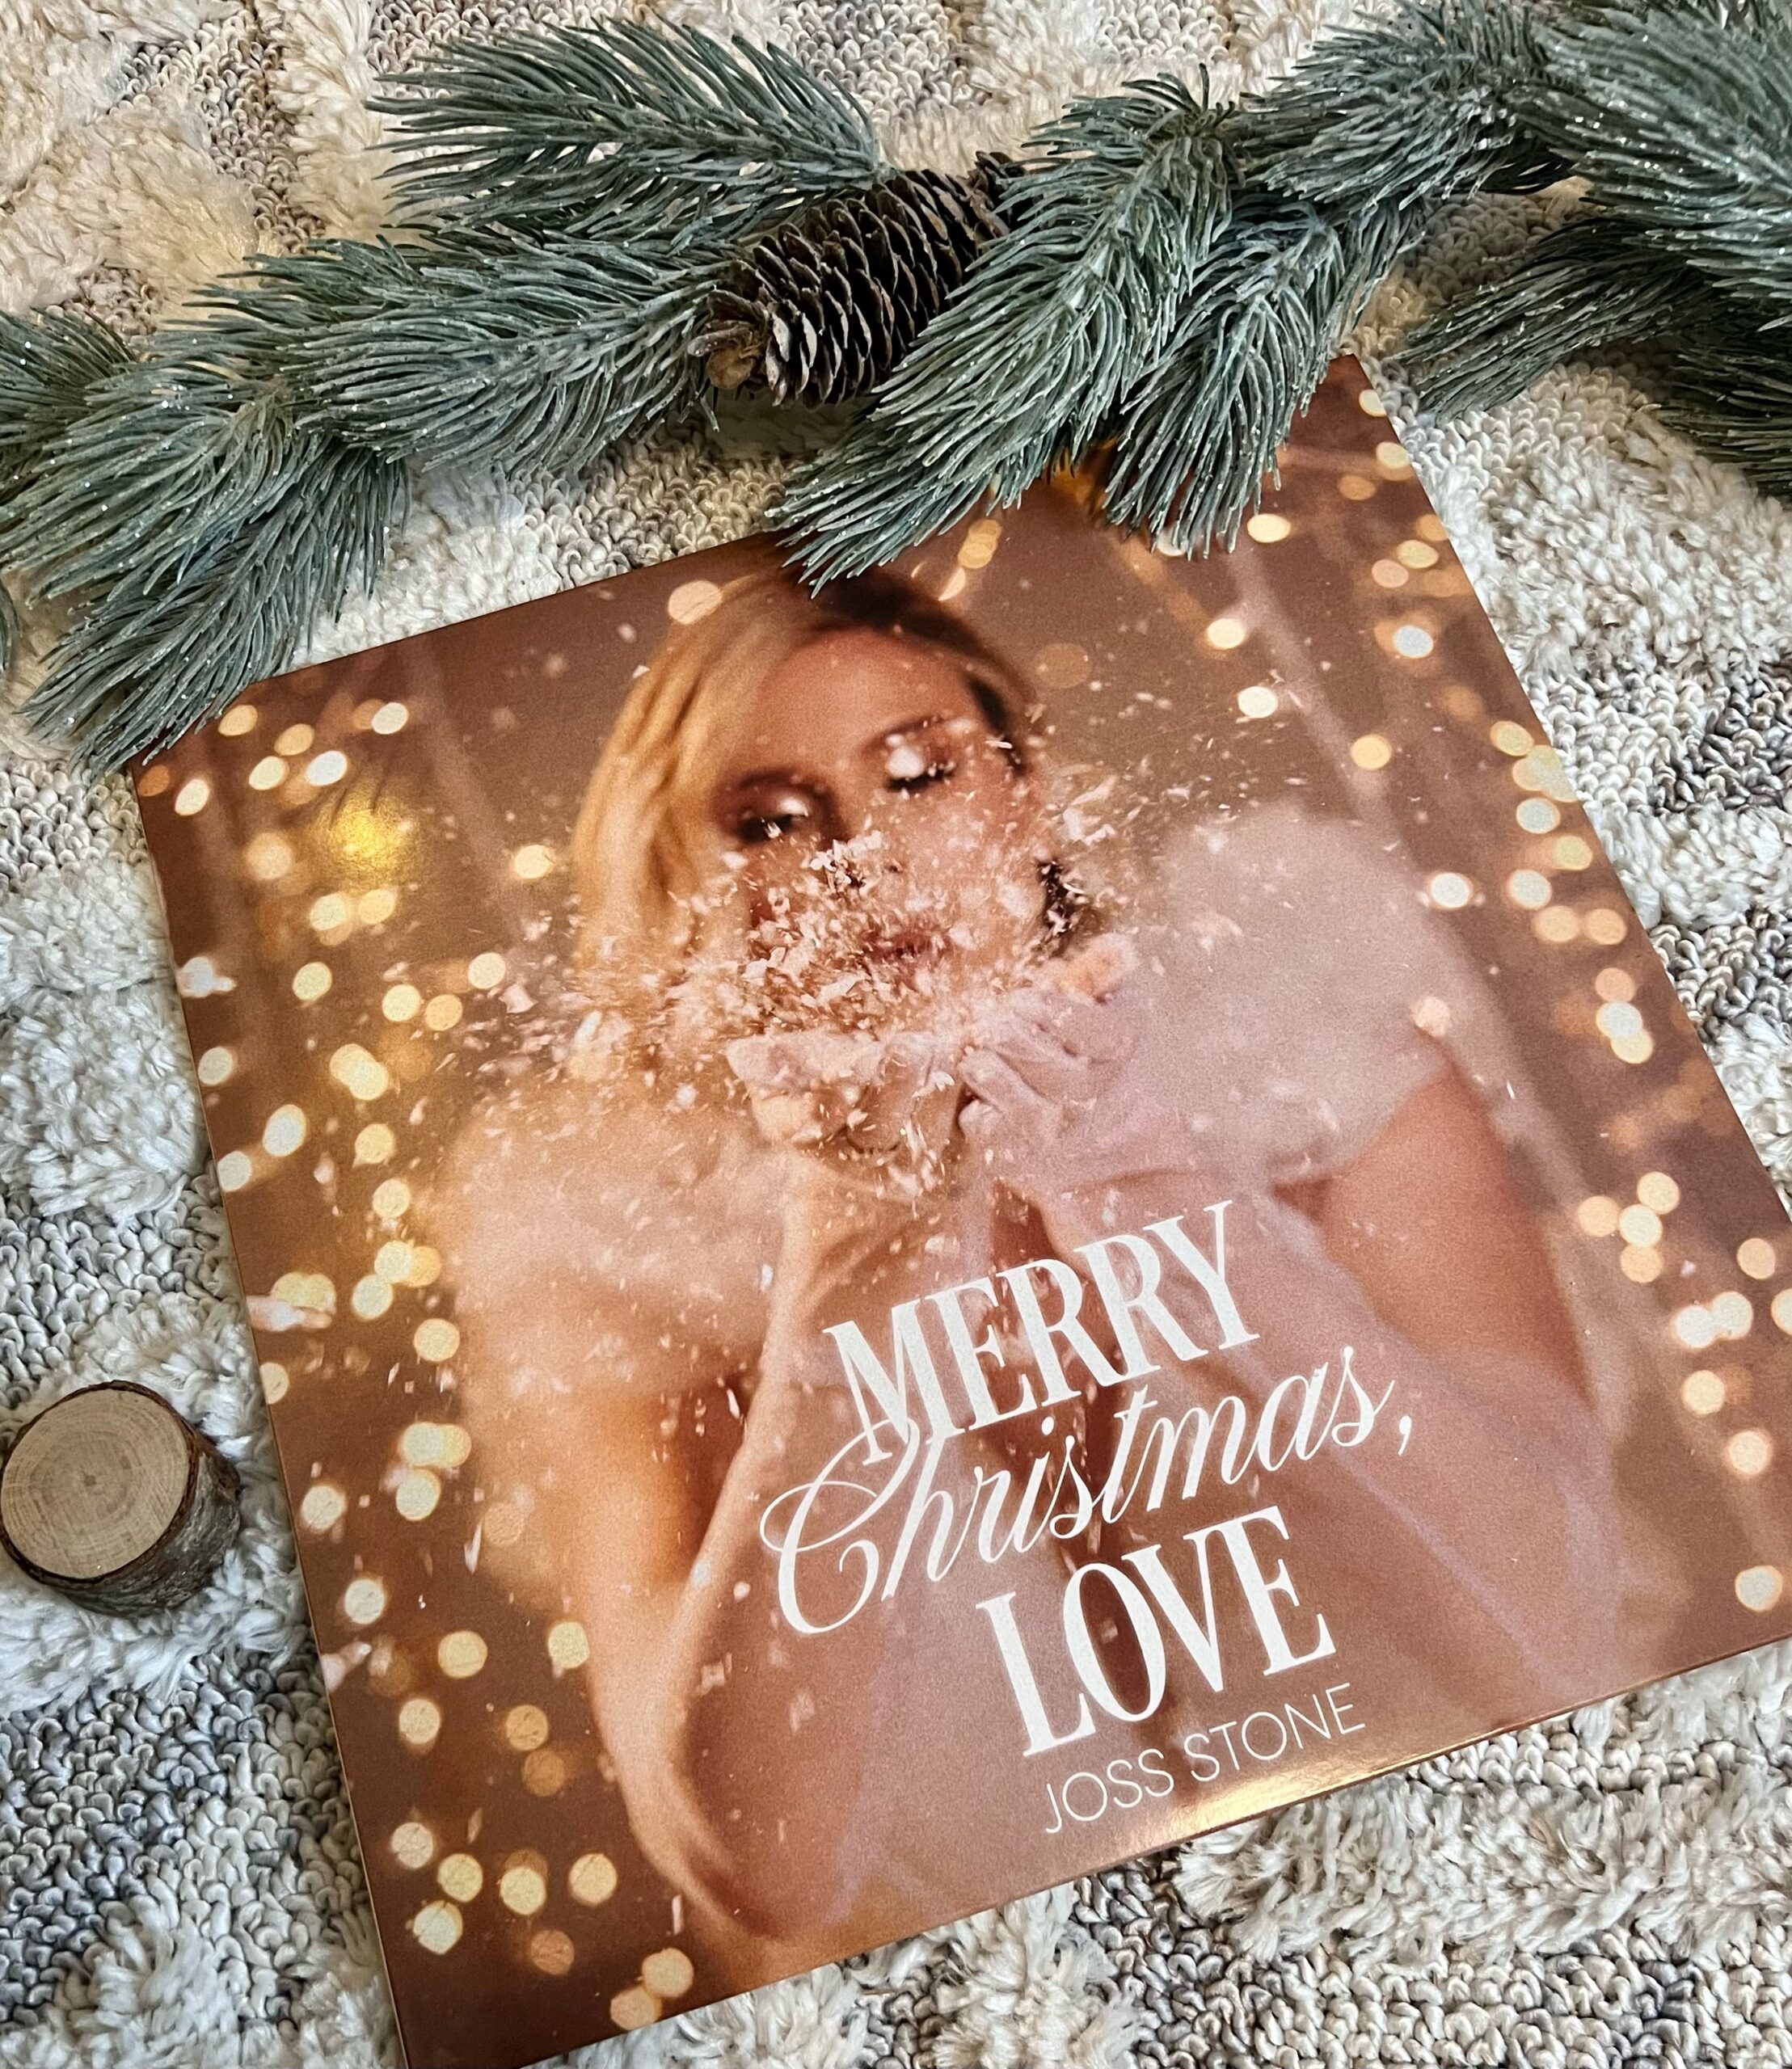 Joss Stone Christmas vinyl album - holiday gifts for everyone